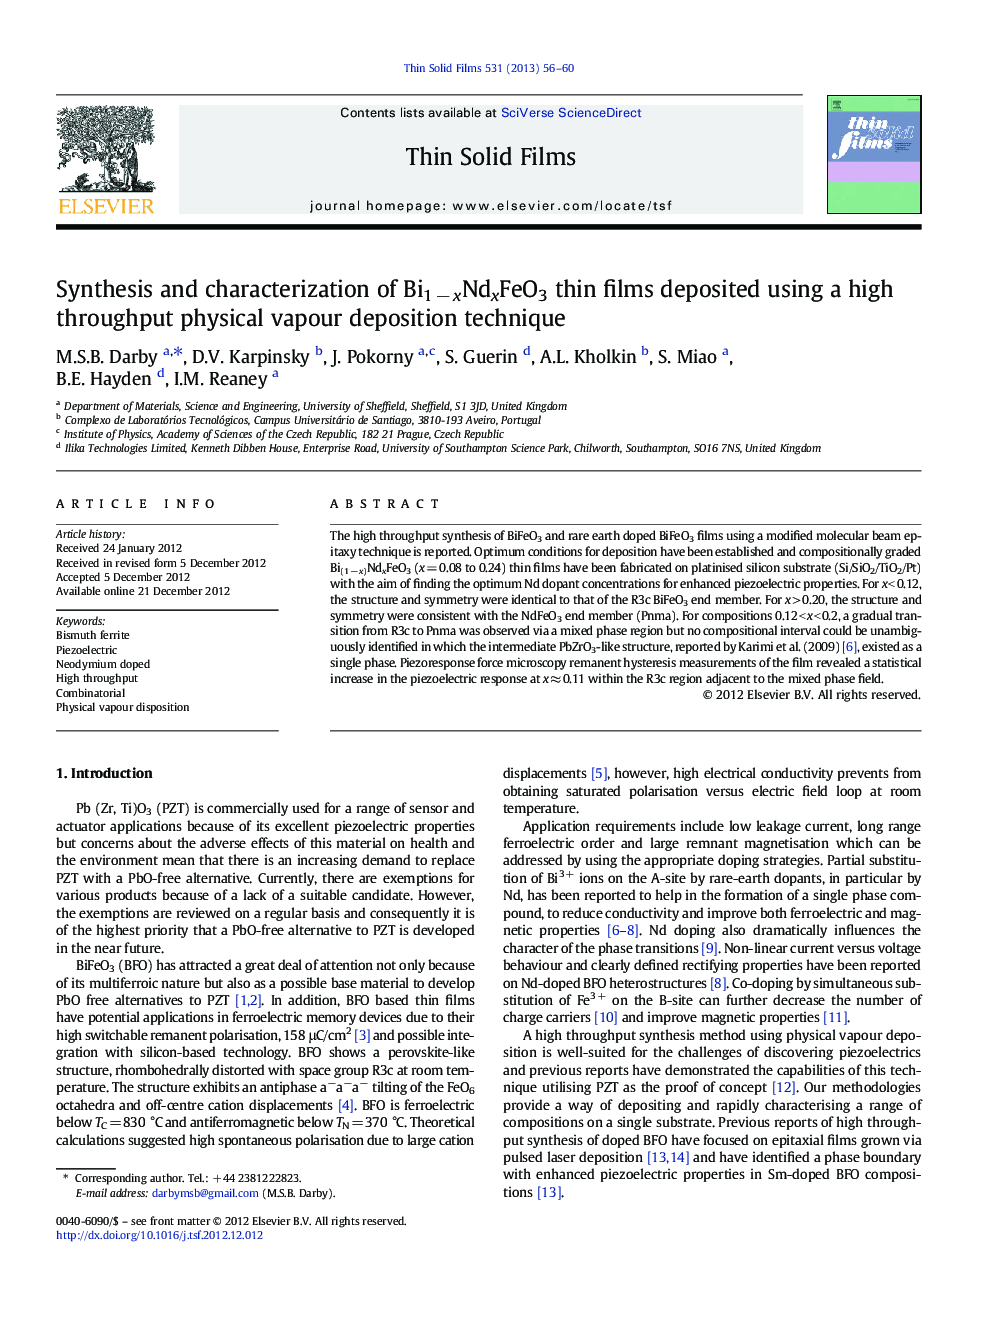 Synthesis and characterization of Bi1Â âÂ xNdxFeO3 thin films deposited using a high throughput physical vapour deposition technique